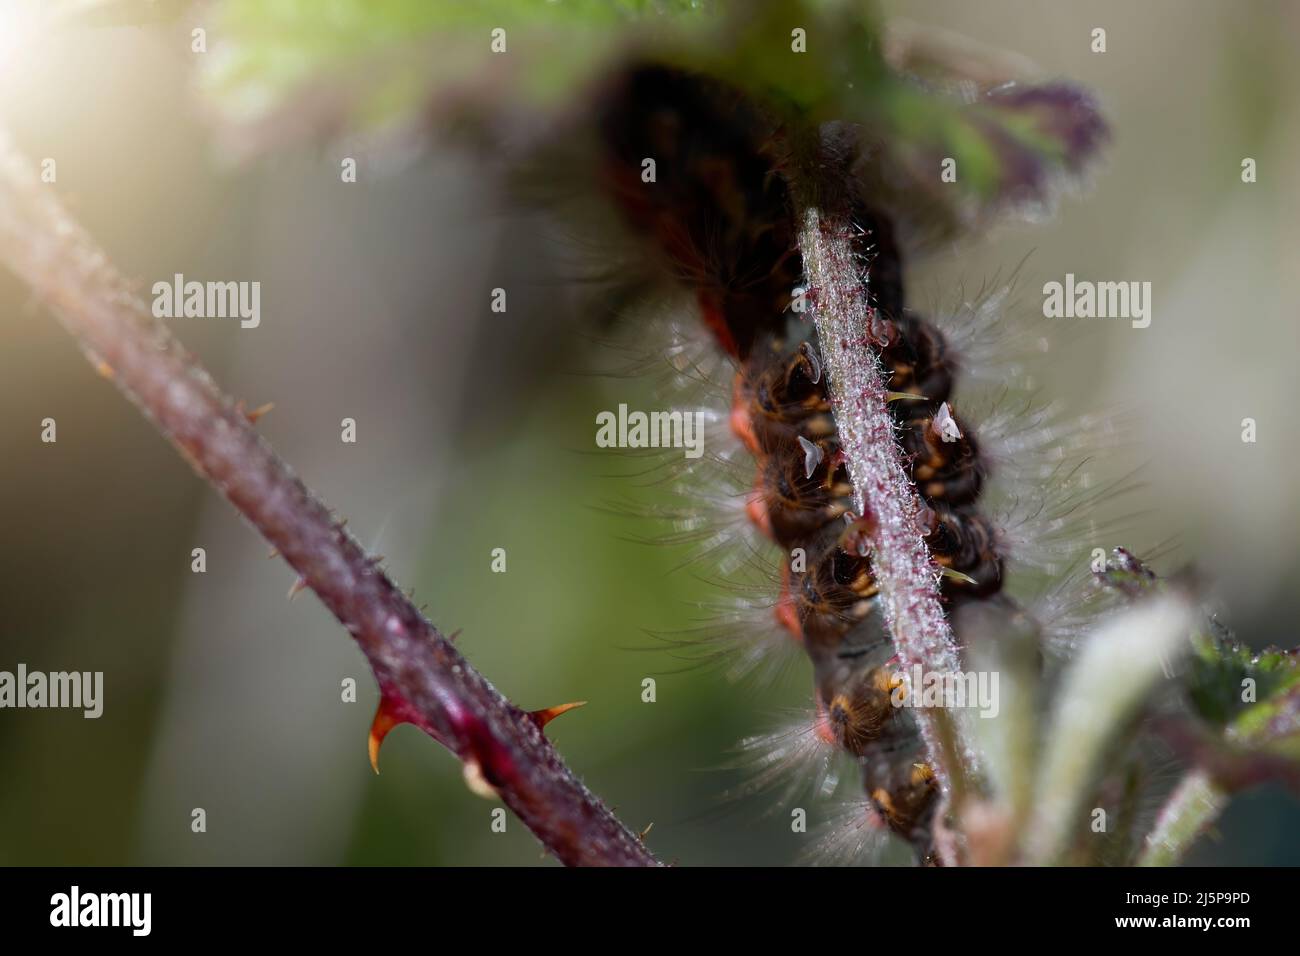 view from below of an oryia caterpillar, detail of the feet. on a blackberry bush. seasonal. springtime. macro photography Stock Photo